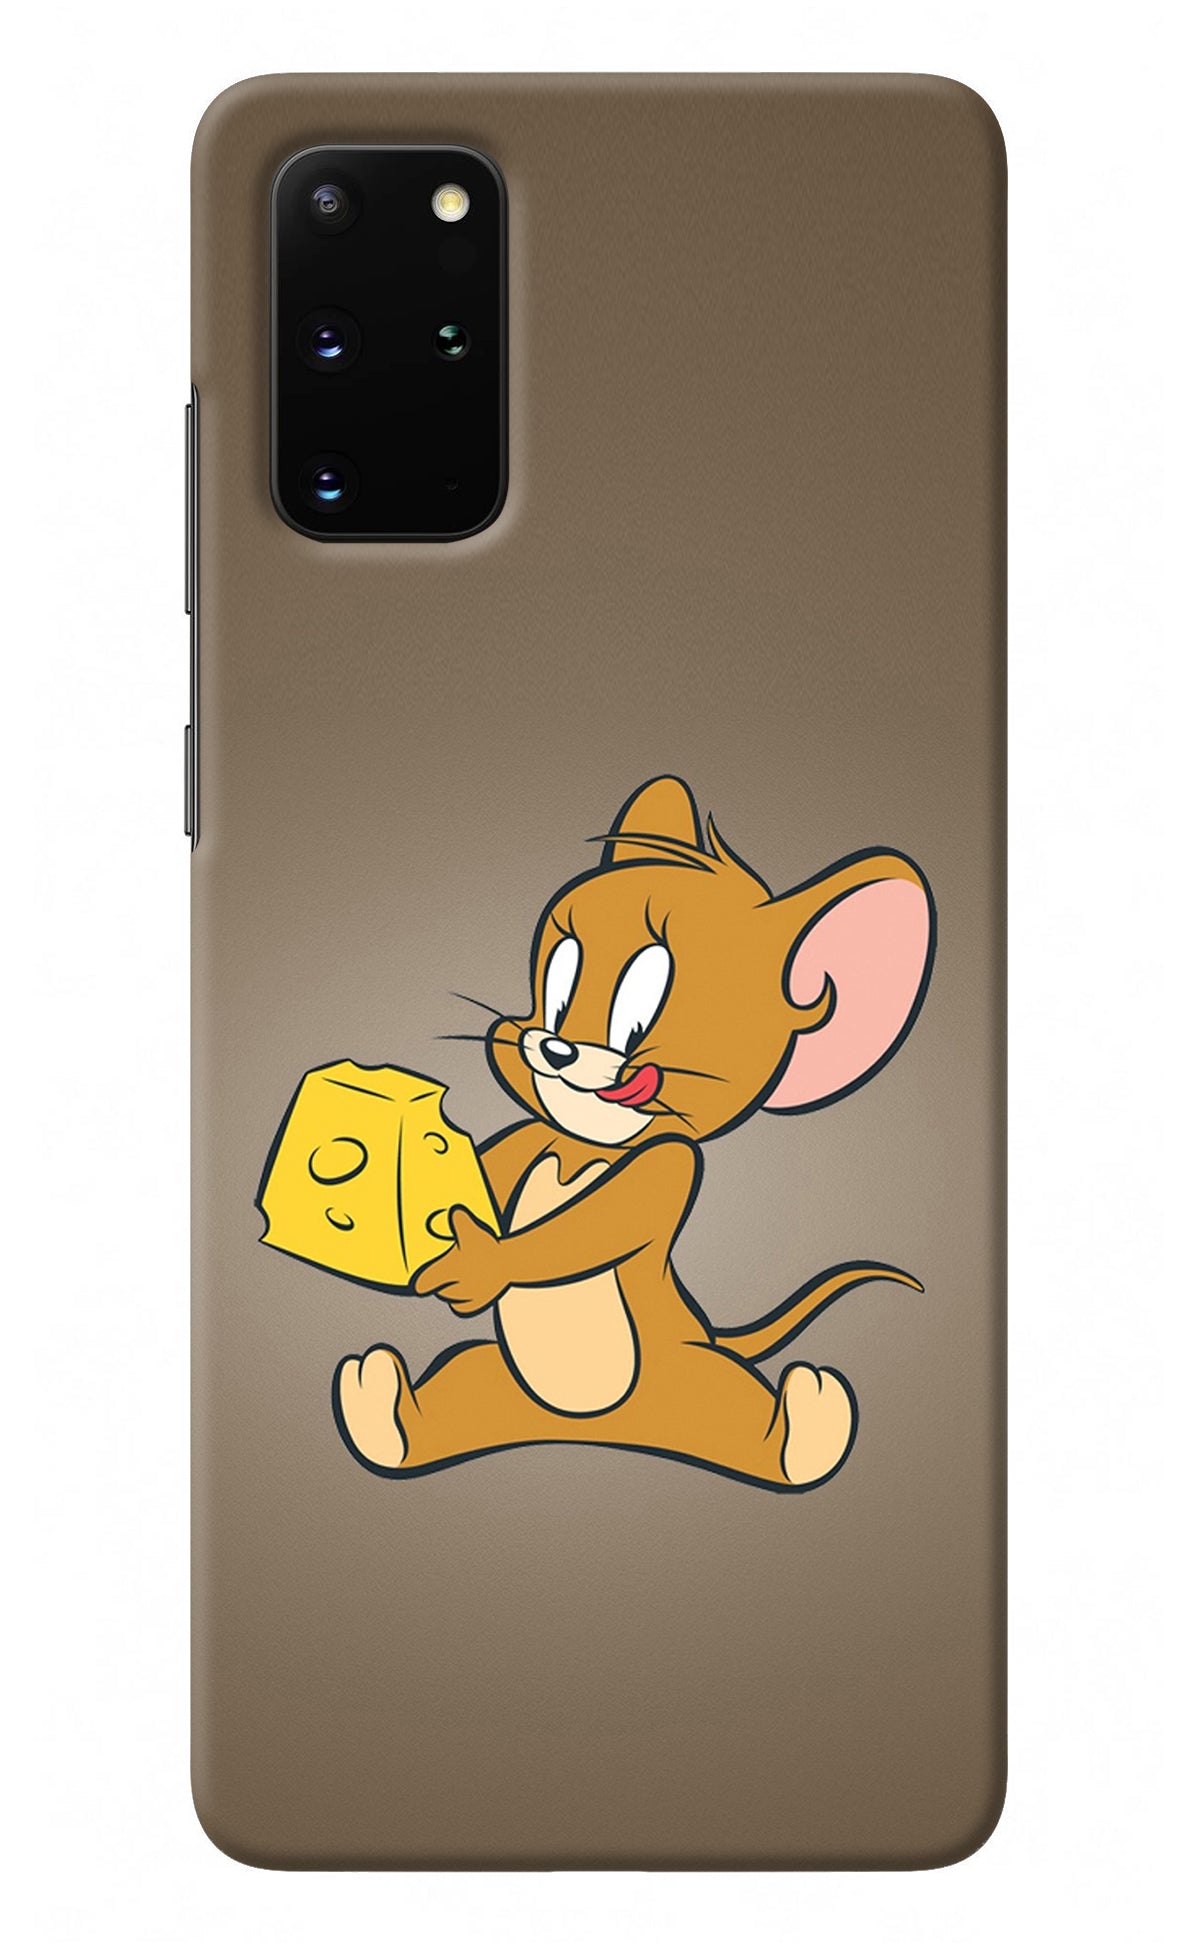 Jerry Samsung S20 Plus Back Cover